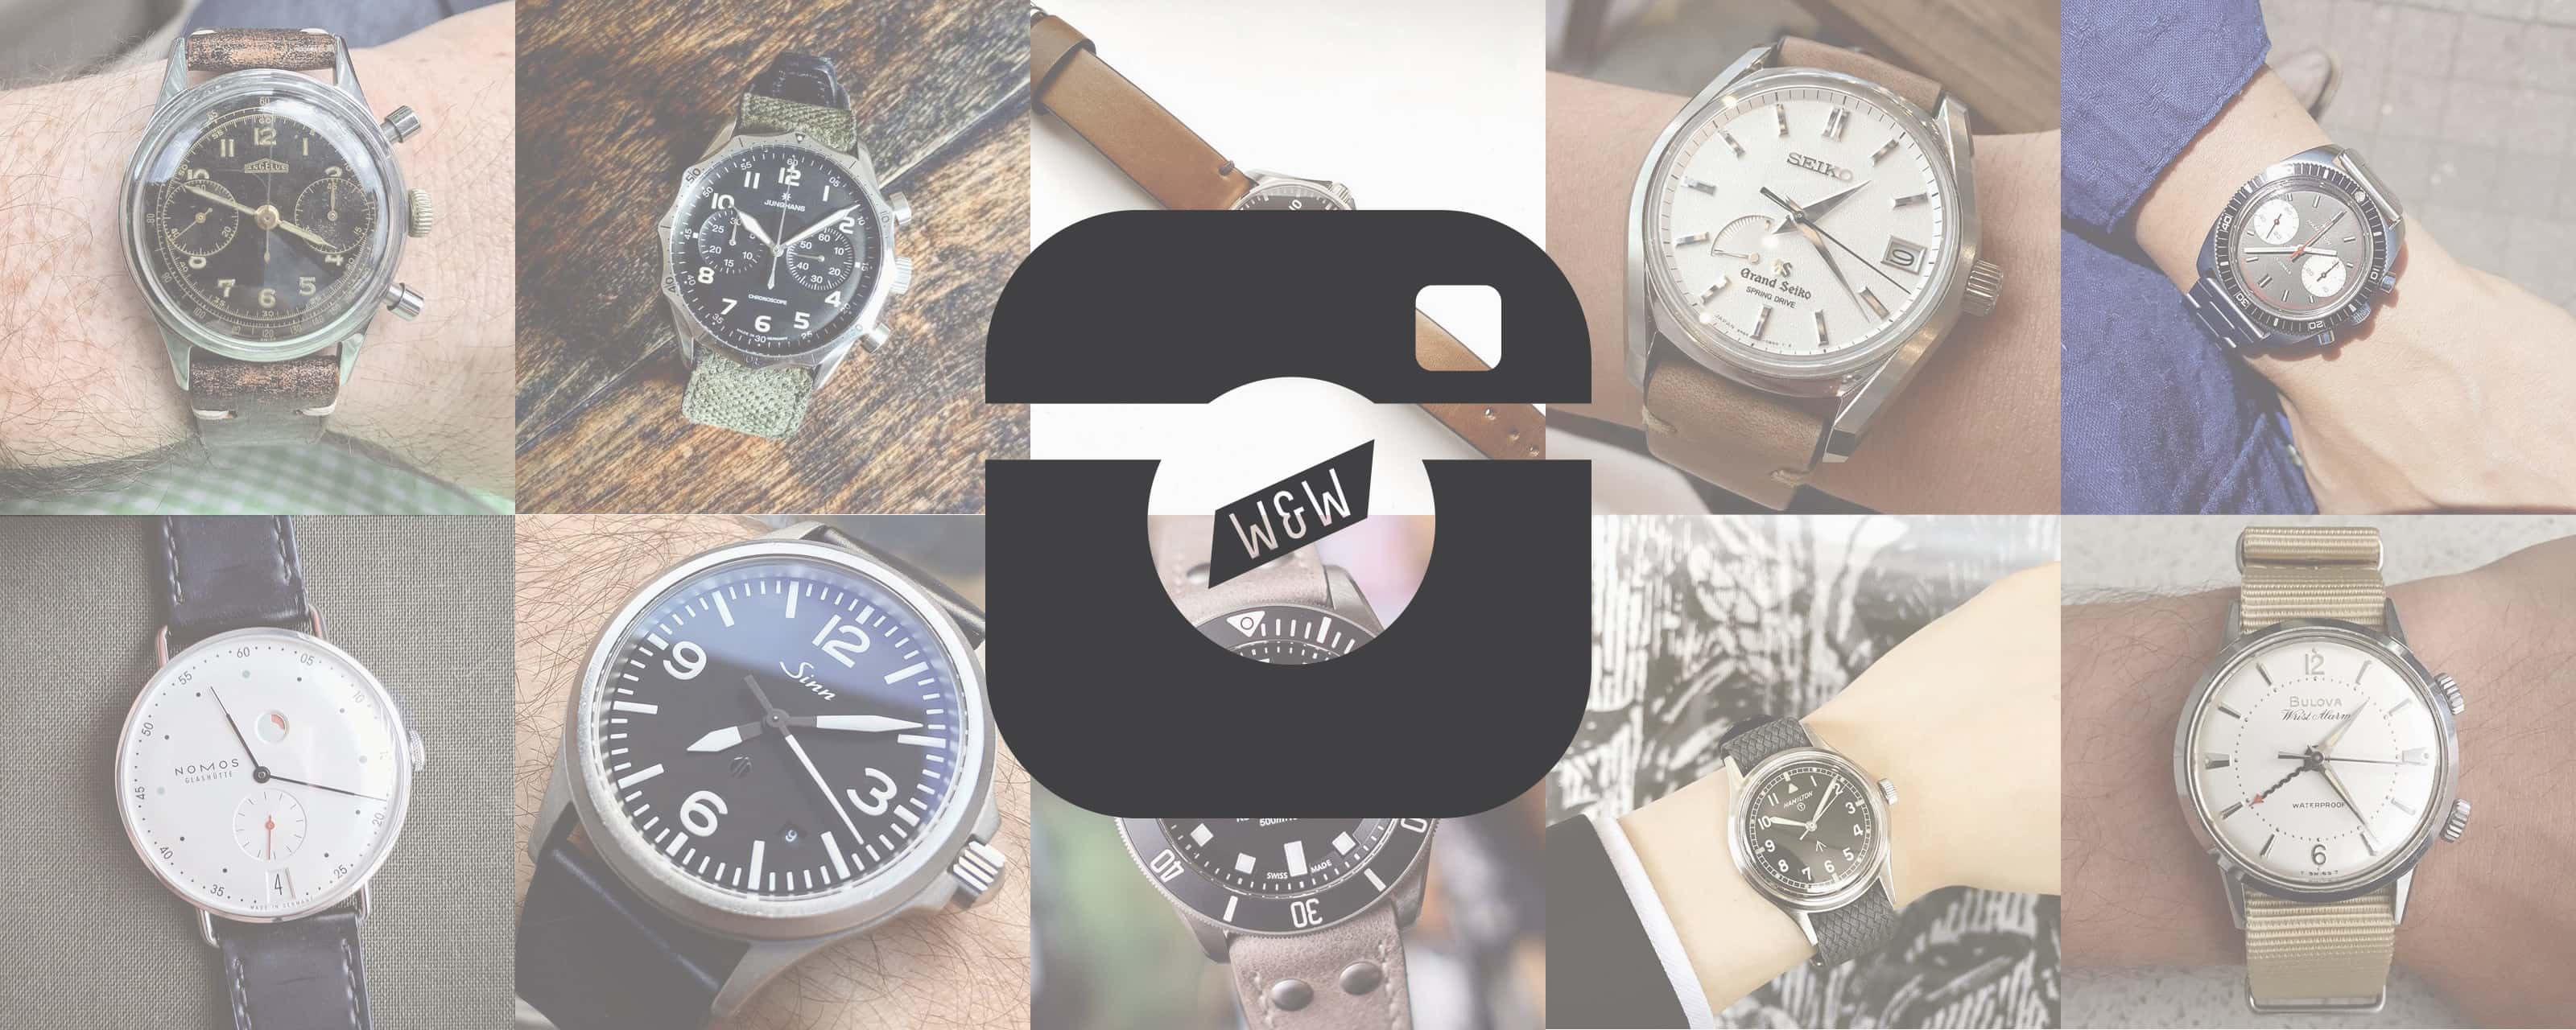 w&w Instagram Round-Up with a Grand Seiko SBGA125, a Vintage Angelus  Chronograph, and More - Worn & Wound